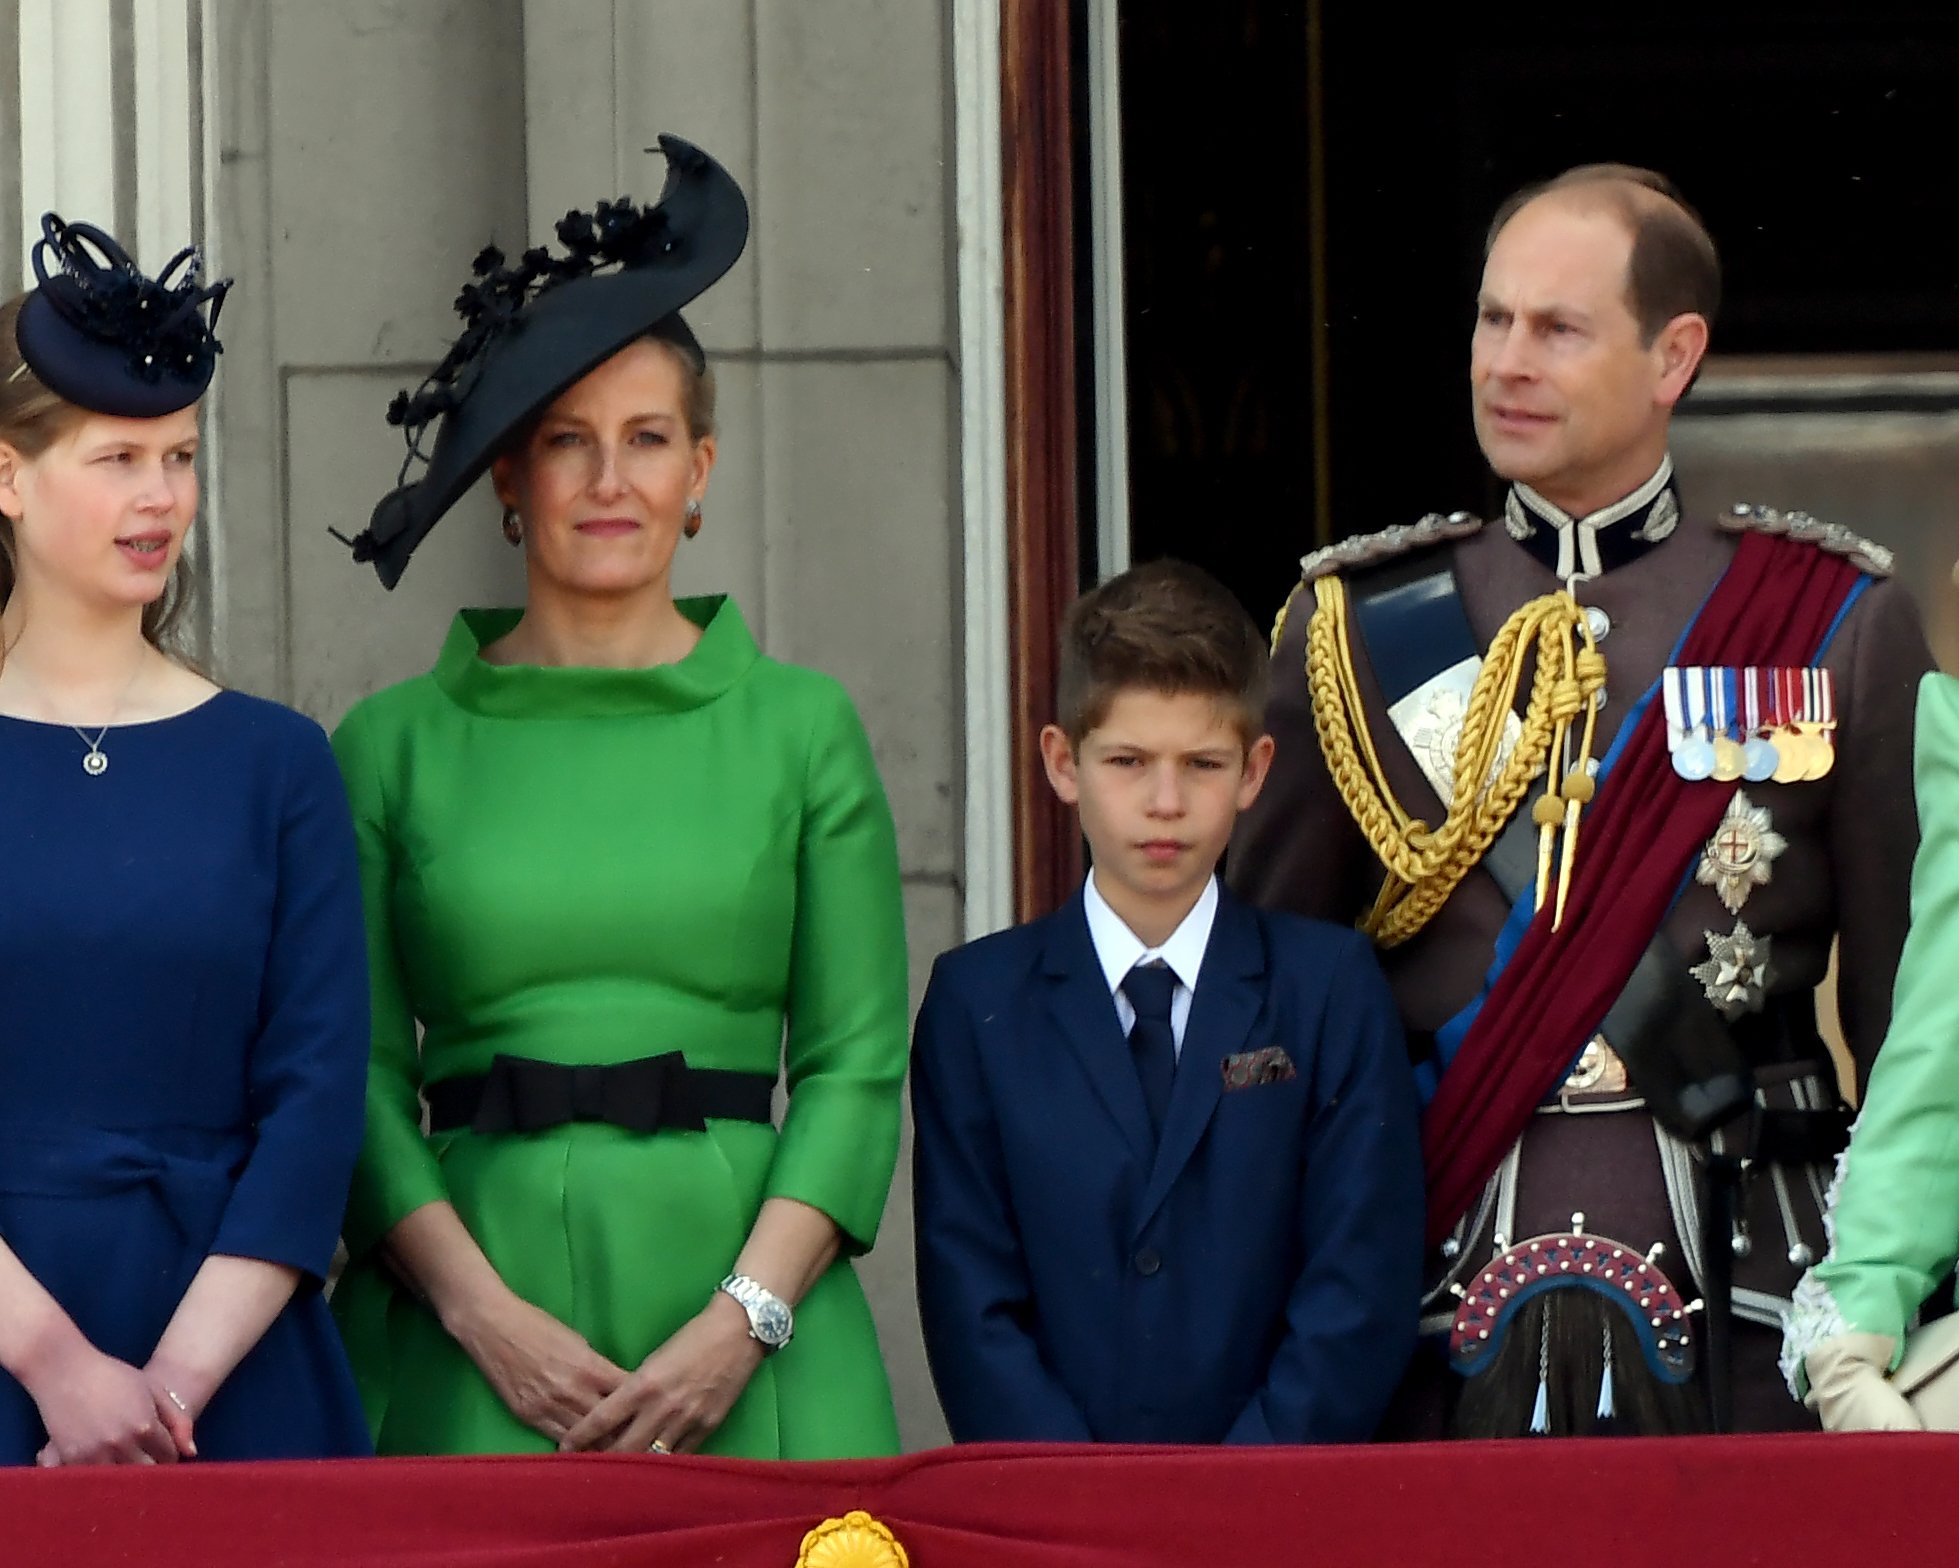 Sophie, Countess of Wessex, Prince Edward, Earl of Wessex, and their children, Lady Louise Windsor and James, Viscount Severn, at the "Trooping the Colour" on June 08, 2019 | Source: Getty Images